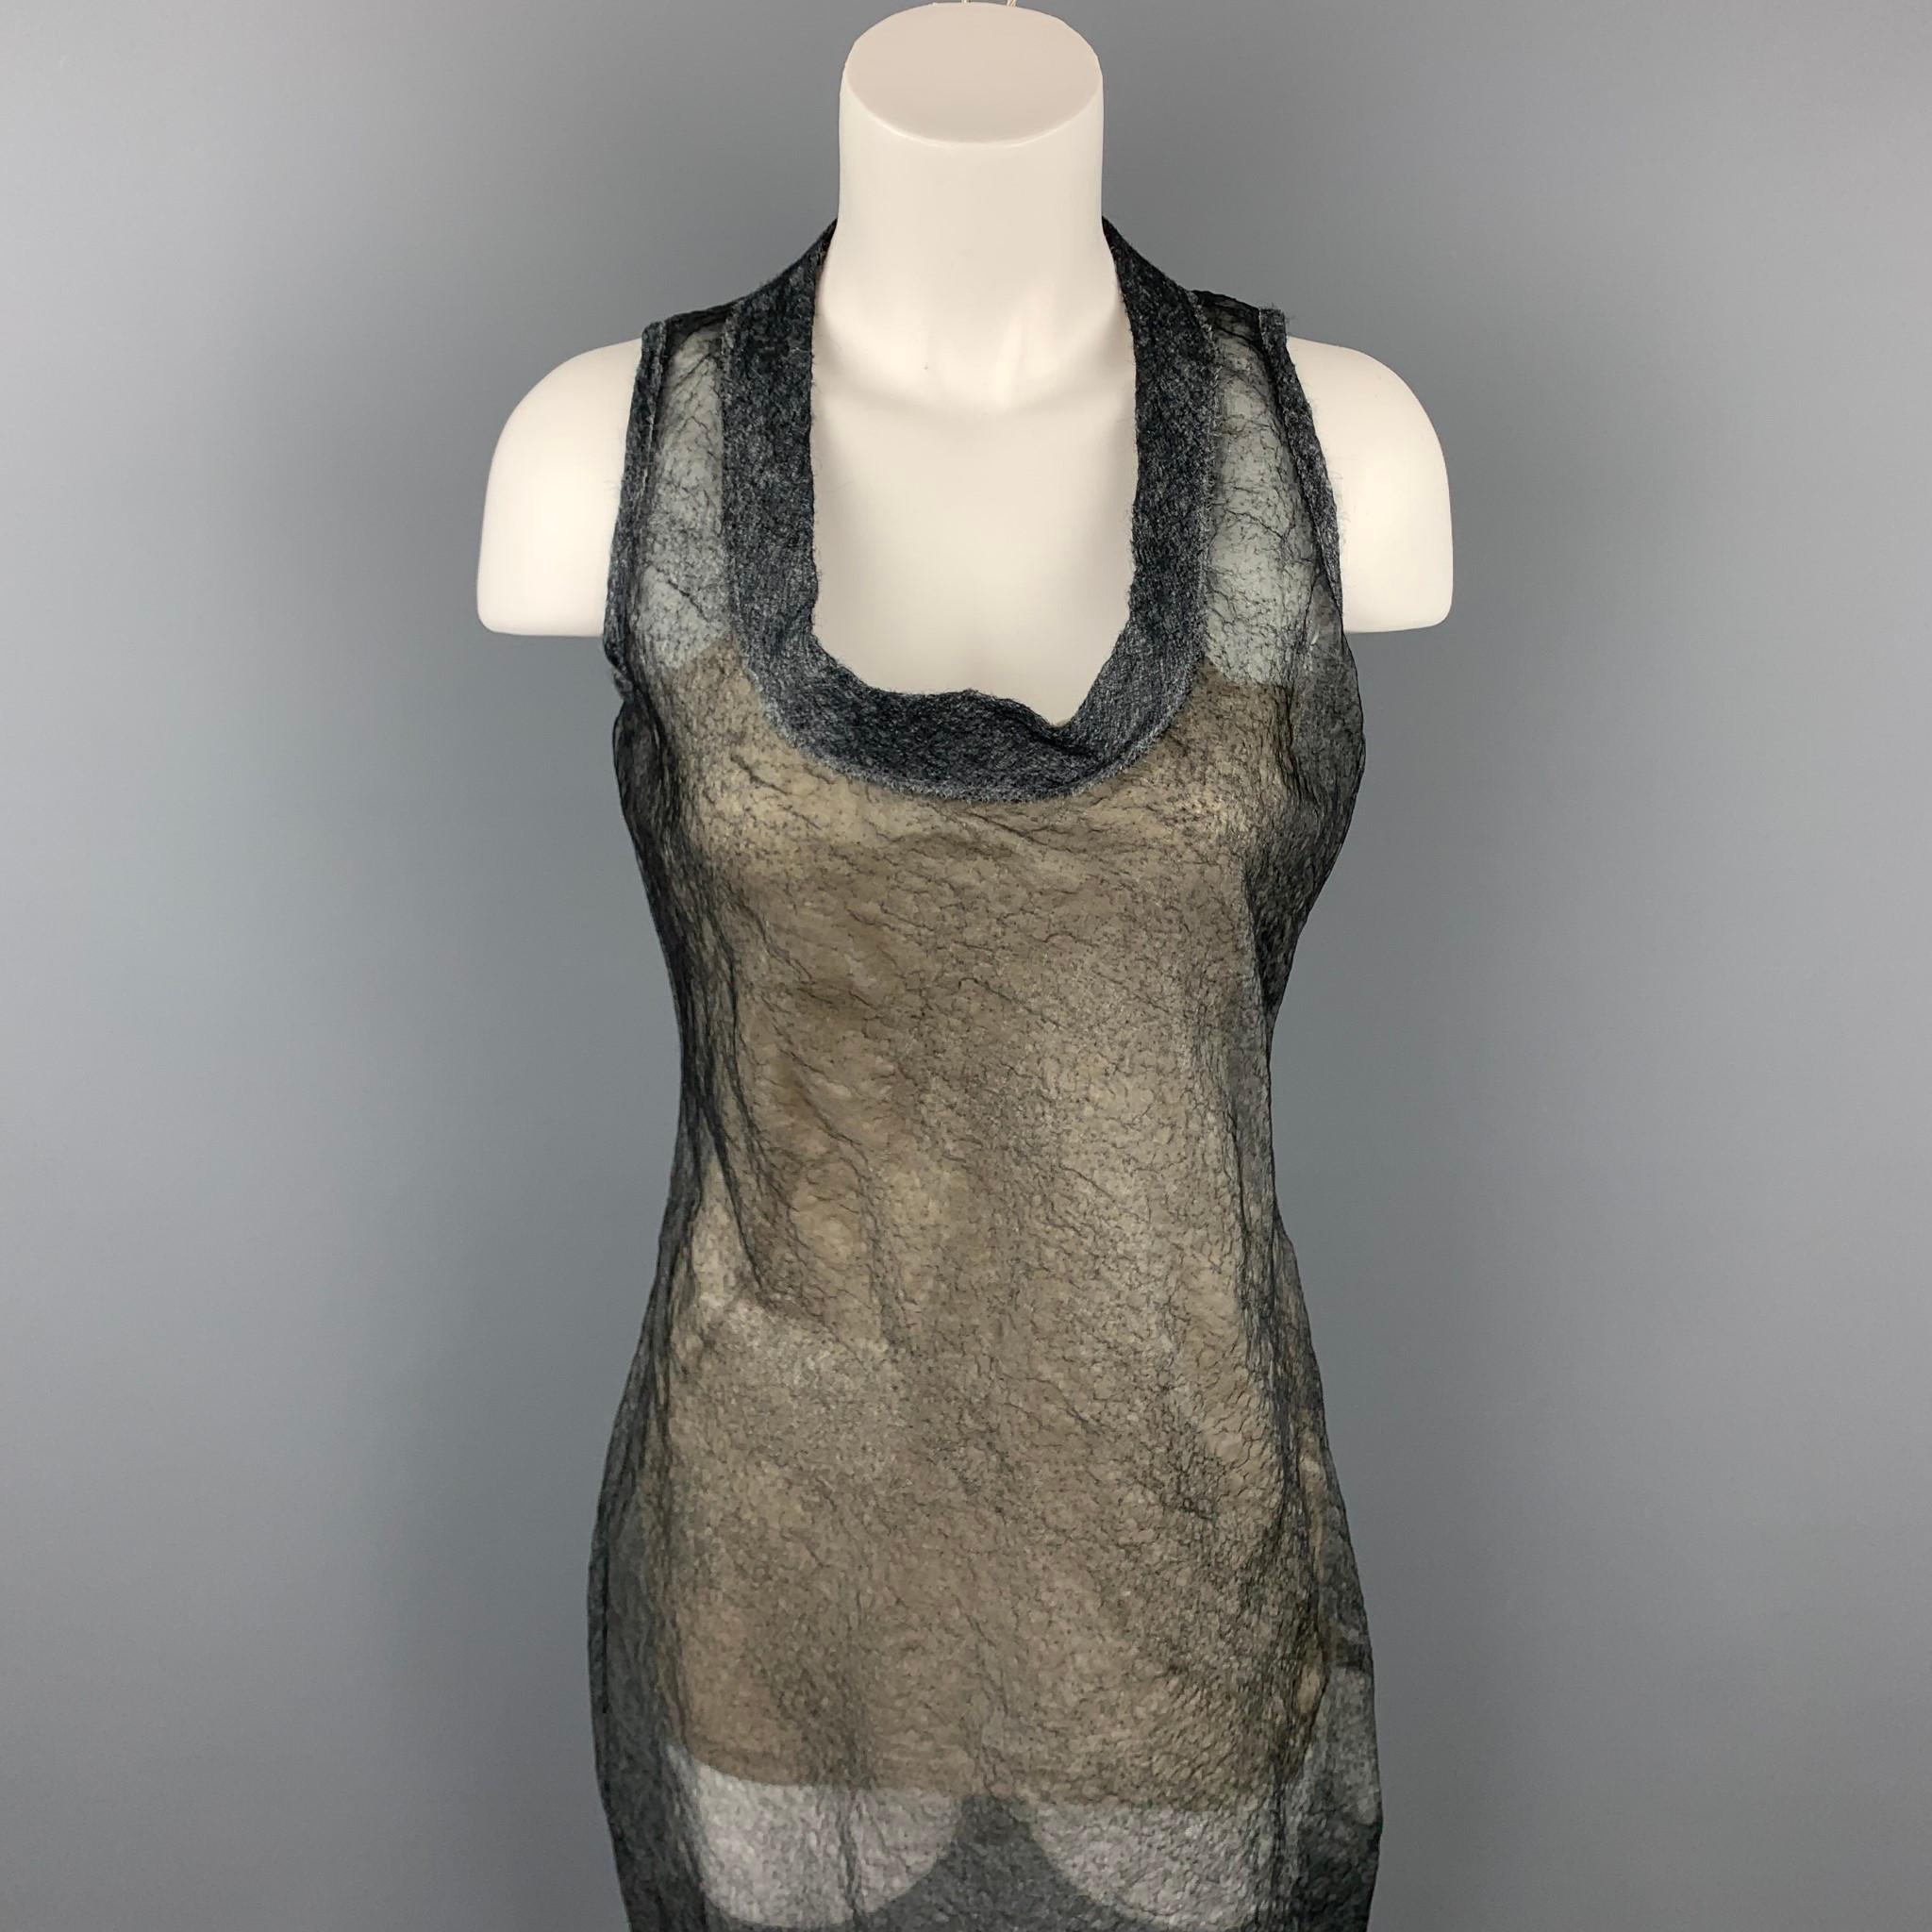 CALVIN KLEIN COLLECTION dress comes in a grey textured silk with a tan slip featuring a shift style and a crew-neck. Made in Italy.

Good Pre-Owned Condition.
Marked: 40

Measurements:

Bust: 36 in.
Hip: 38 in.
Length: 35 in. 